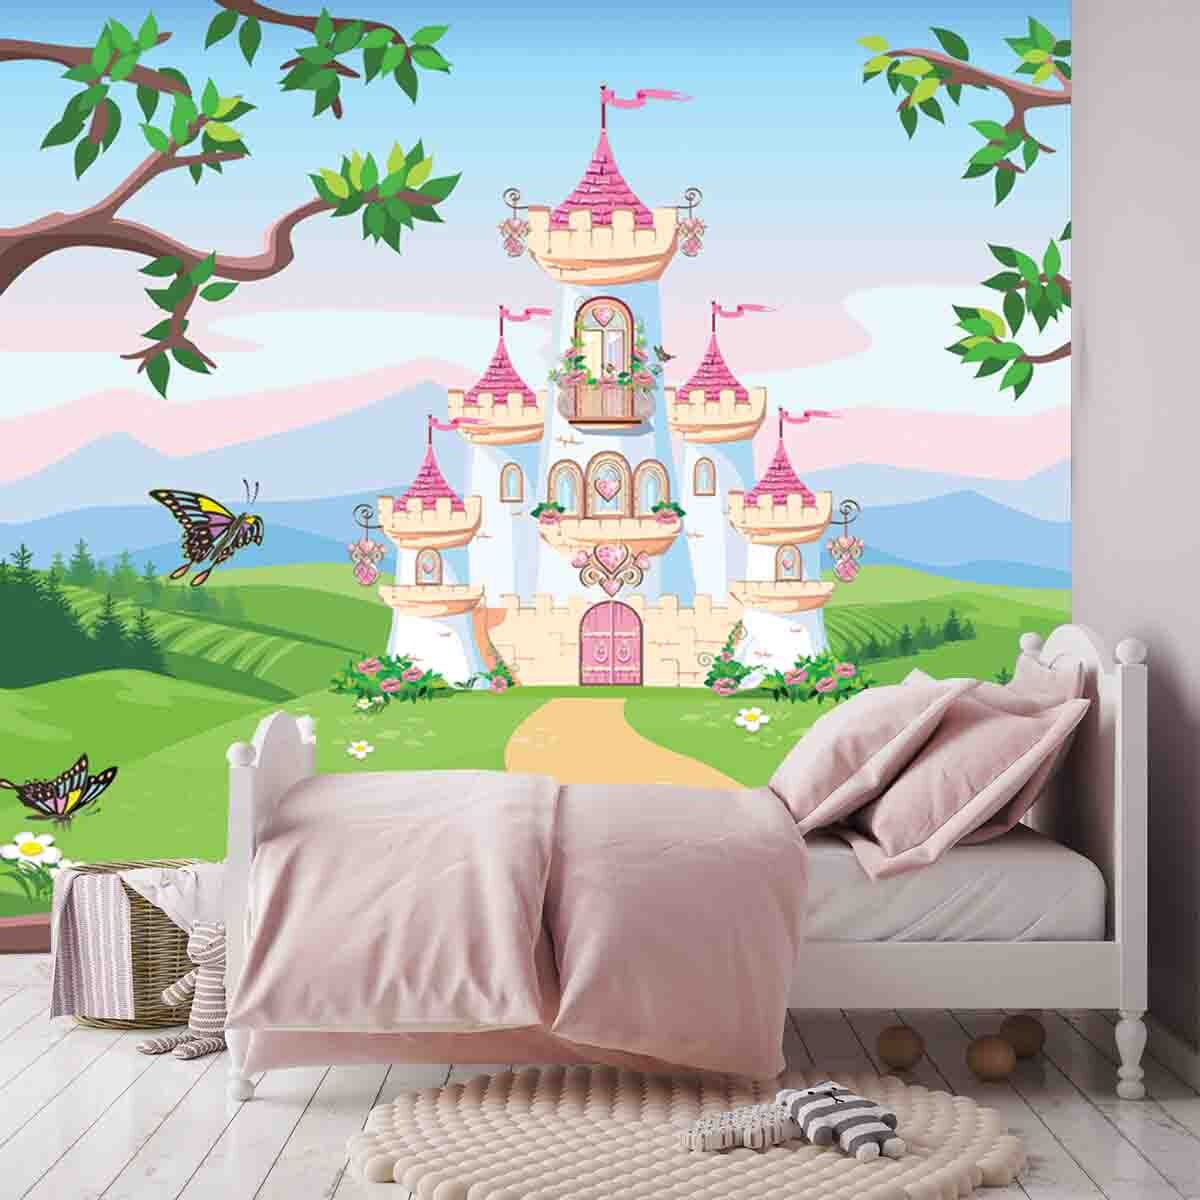 Girls Princess Castle In the Forest Wallpaper Bedroom Mural